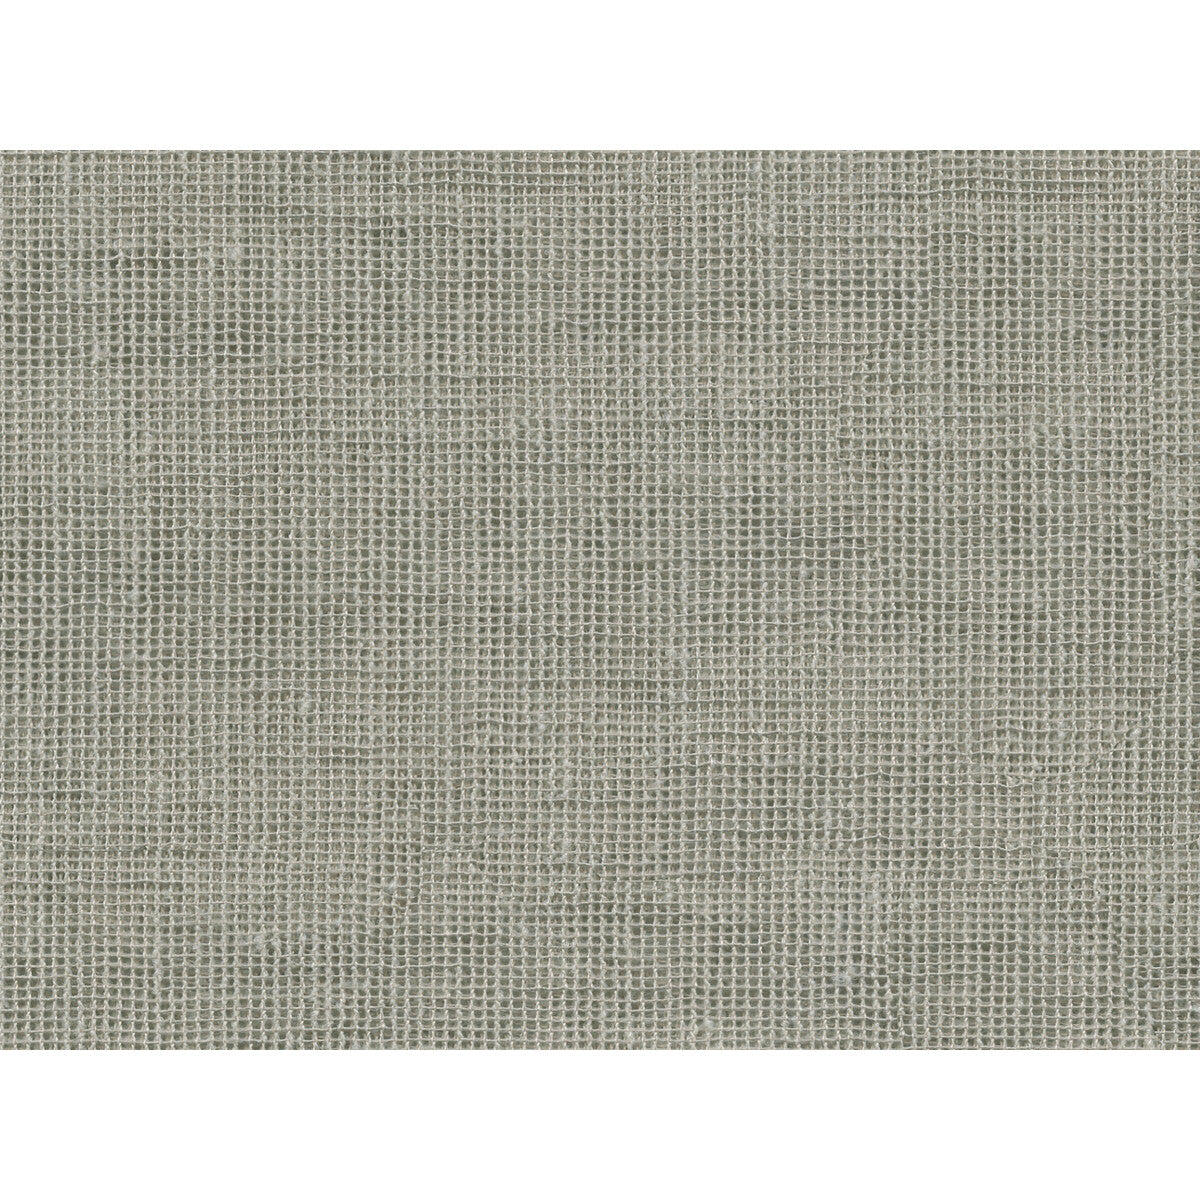 Kravet Contract fabric in 4522-16 color - pattern 4522.16.0 - by Kravet Contract